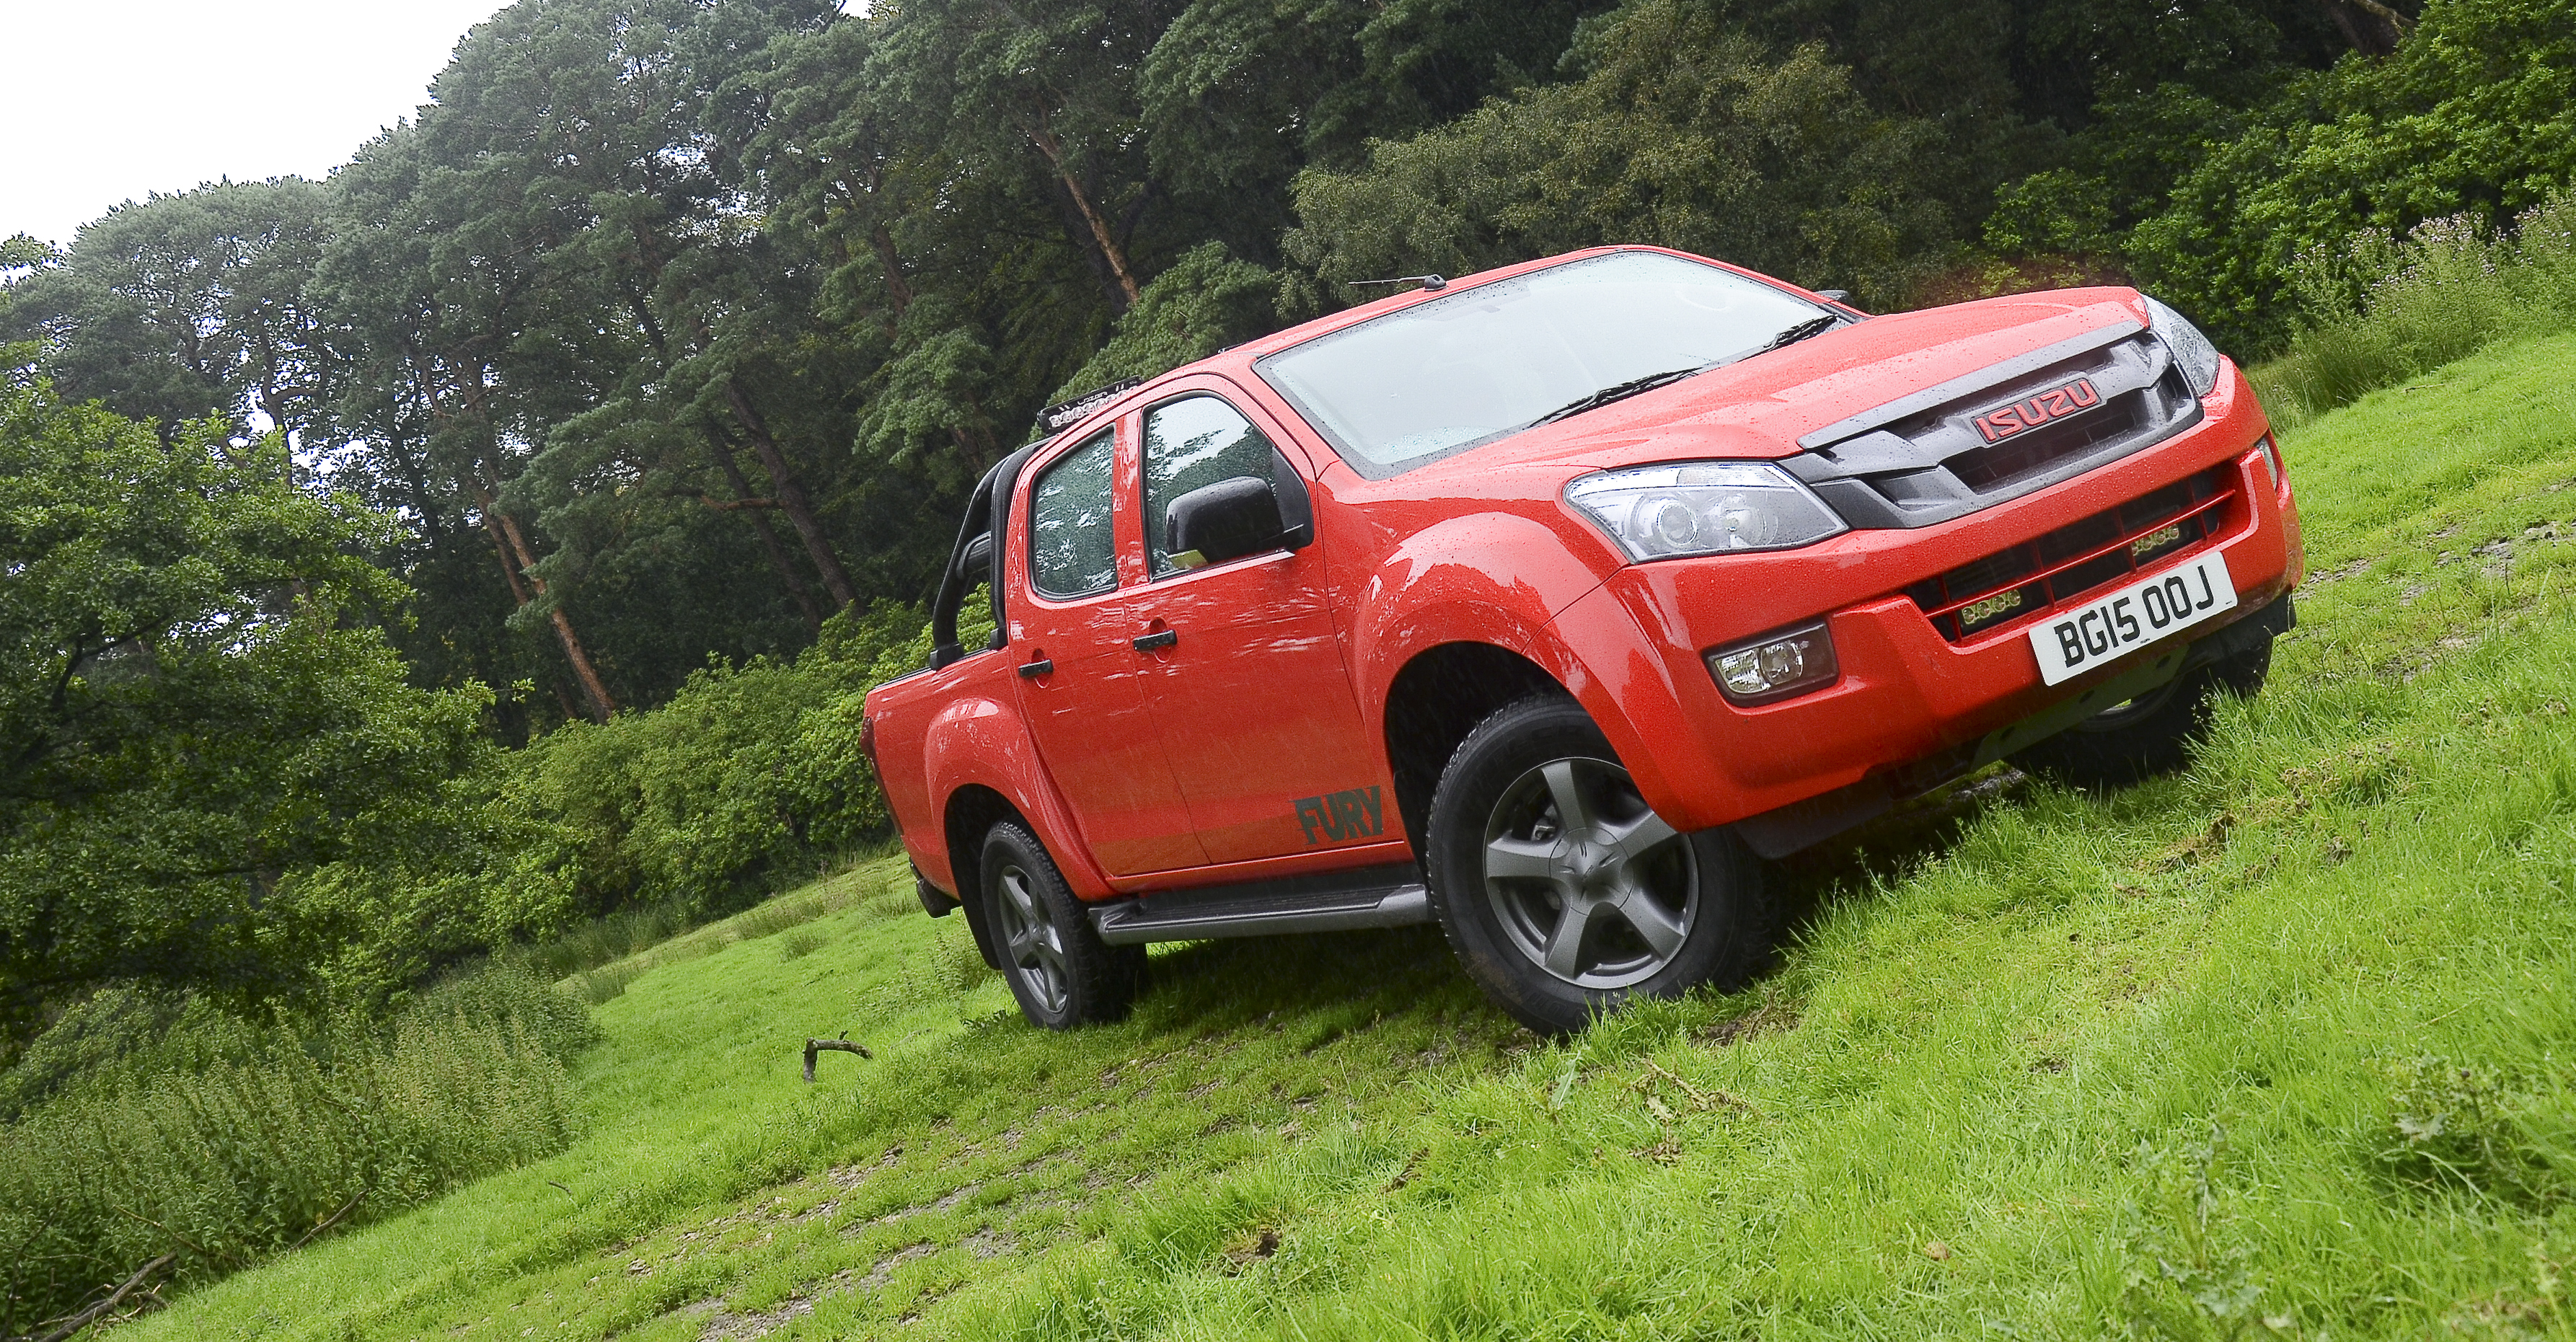 Isuzu's D-Max Fury is as in your face as it gets. Isuzu D-Max Fury-MY16. Image: Mark Stone